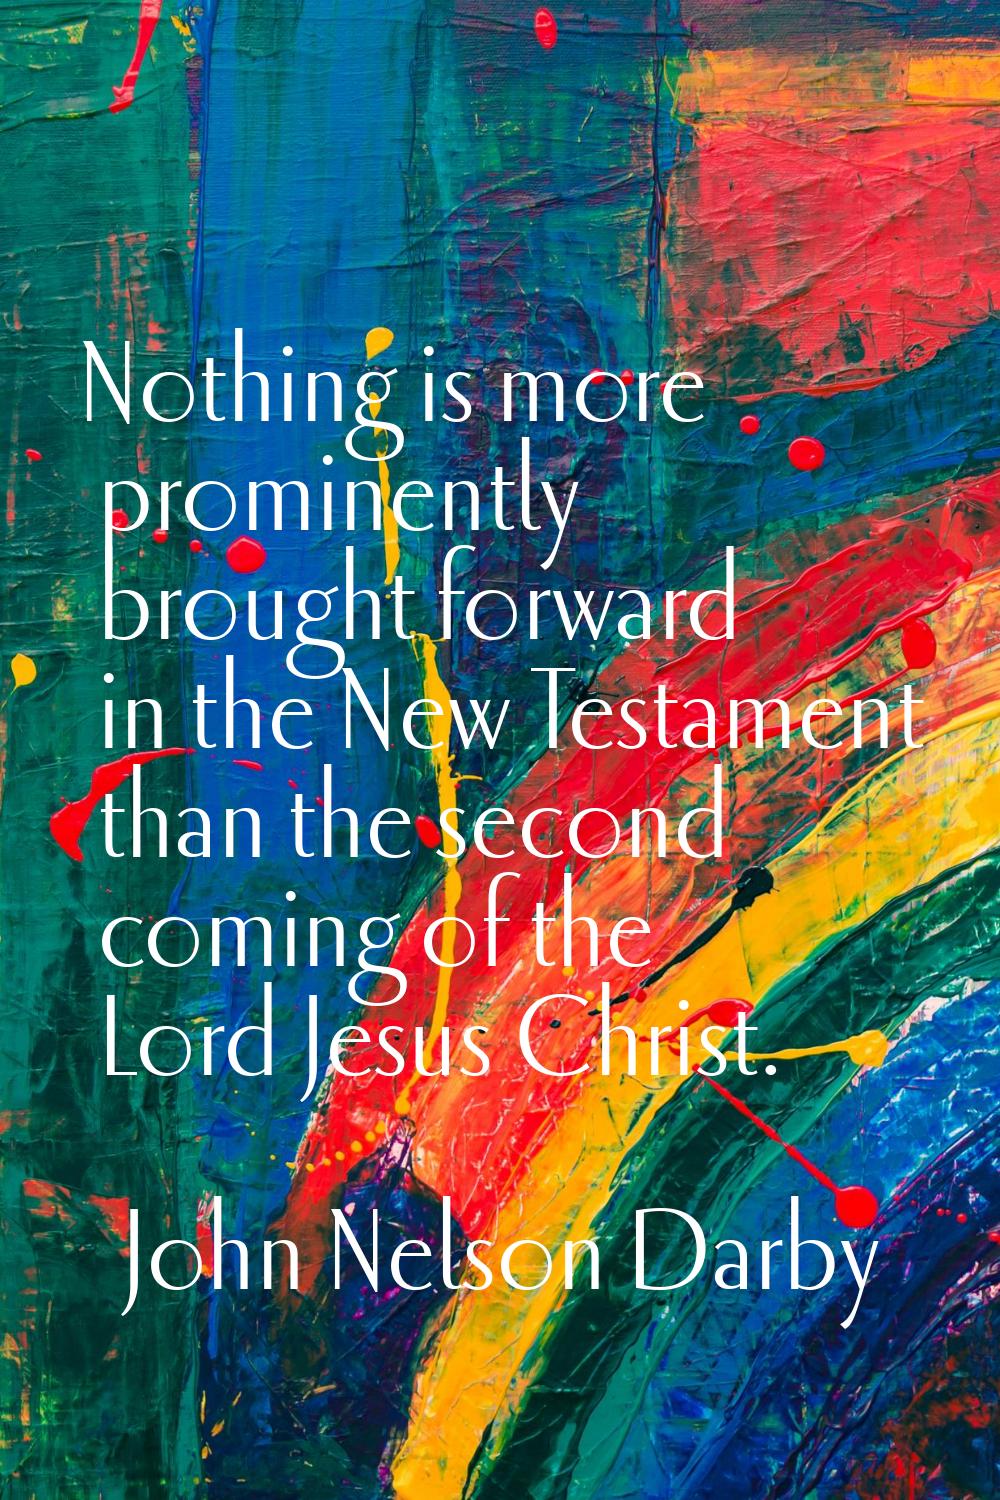 Nothing is more prominently brought forward in the New Testament than the second coming of the Lord